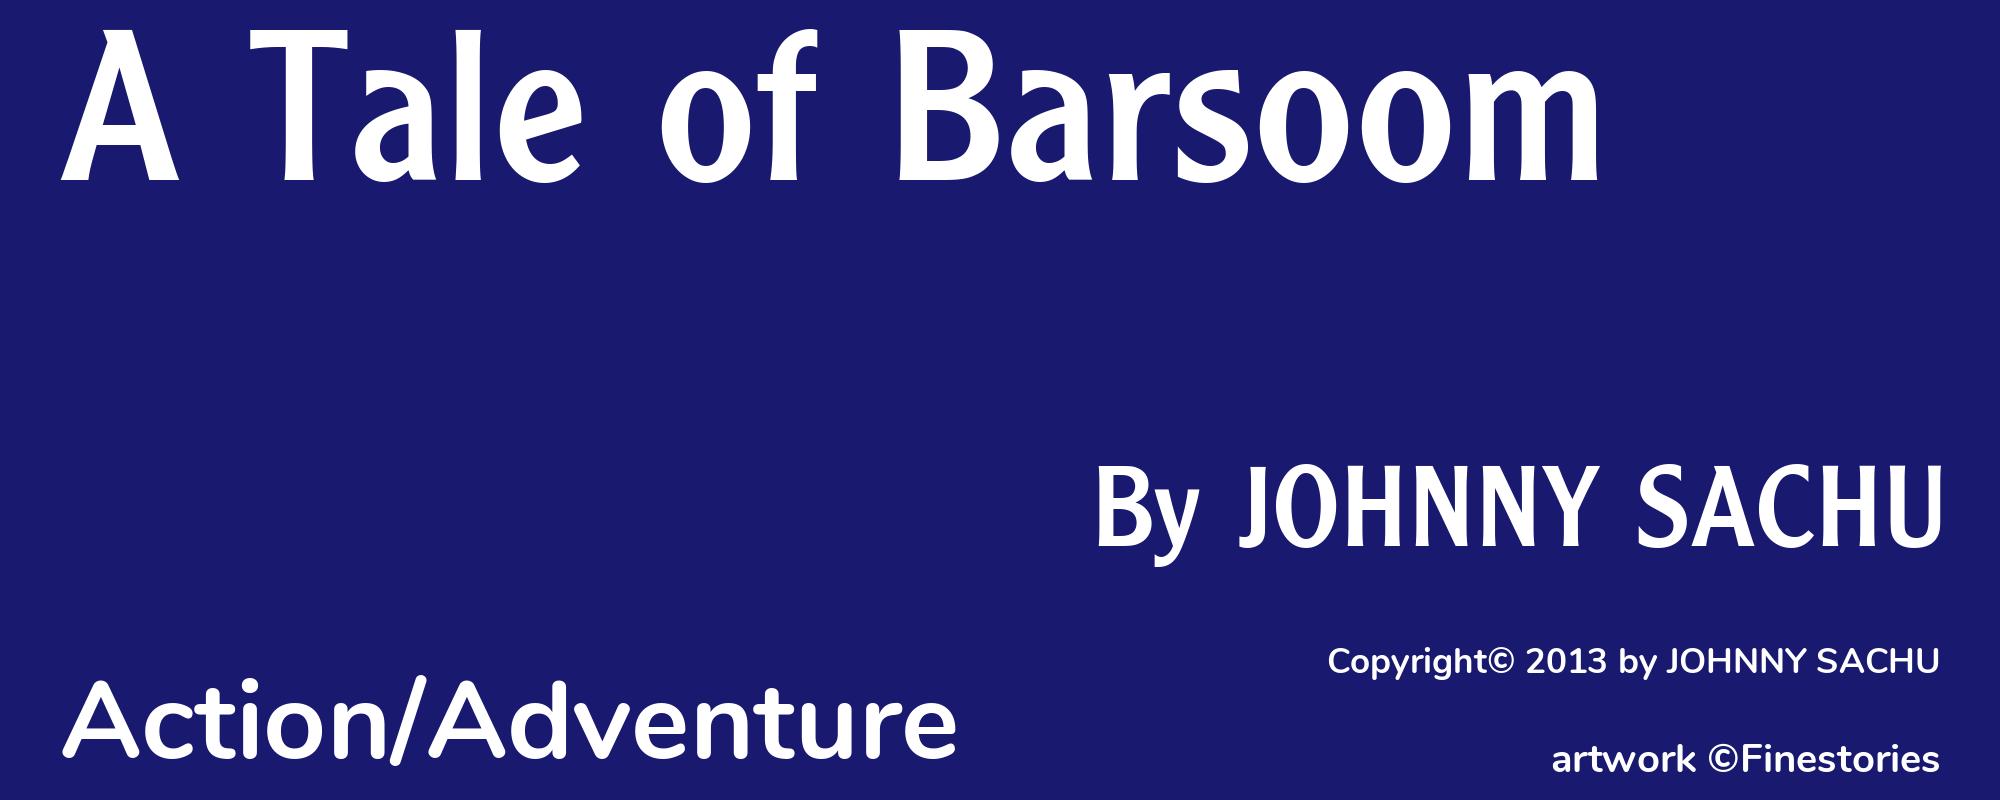 A Tale of Barsoom - Cover